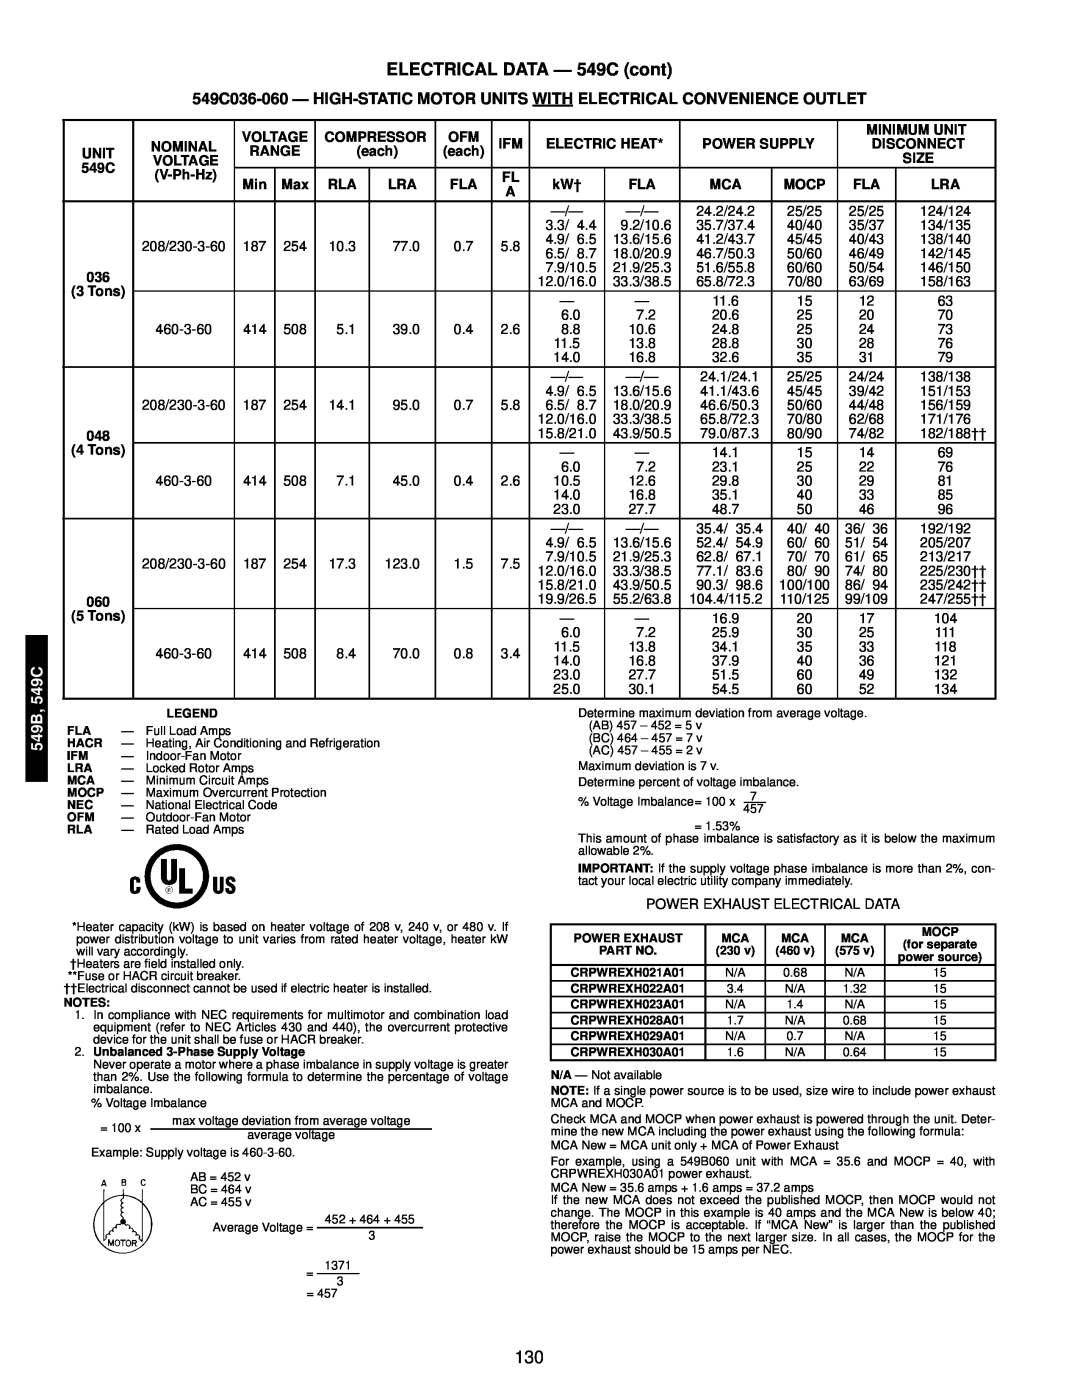 Bryant manual ELECTRICAL DATA — 549C cont, 549B, Voltage 